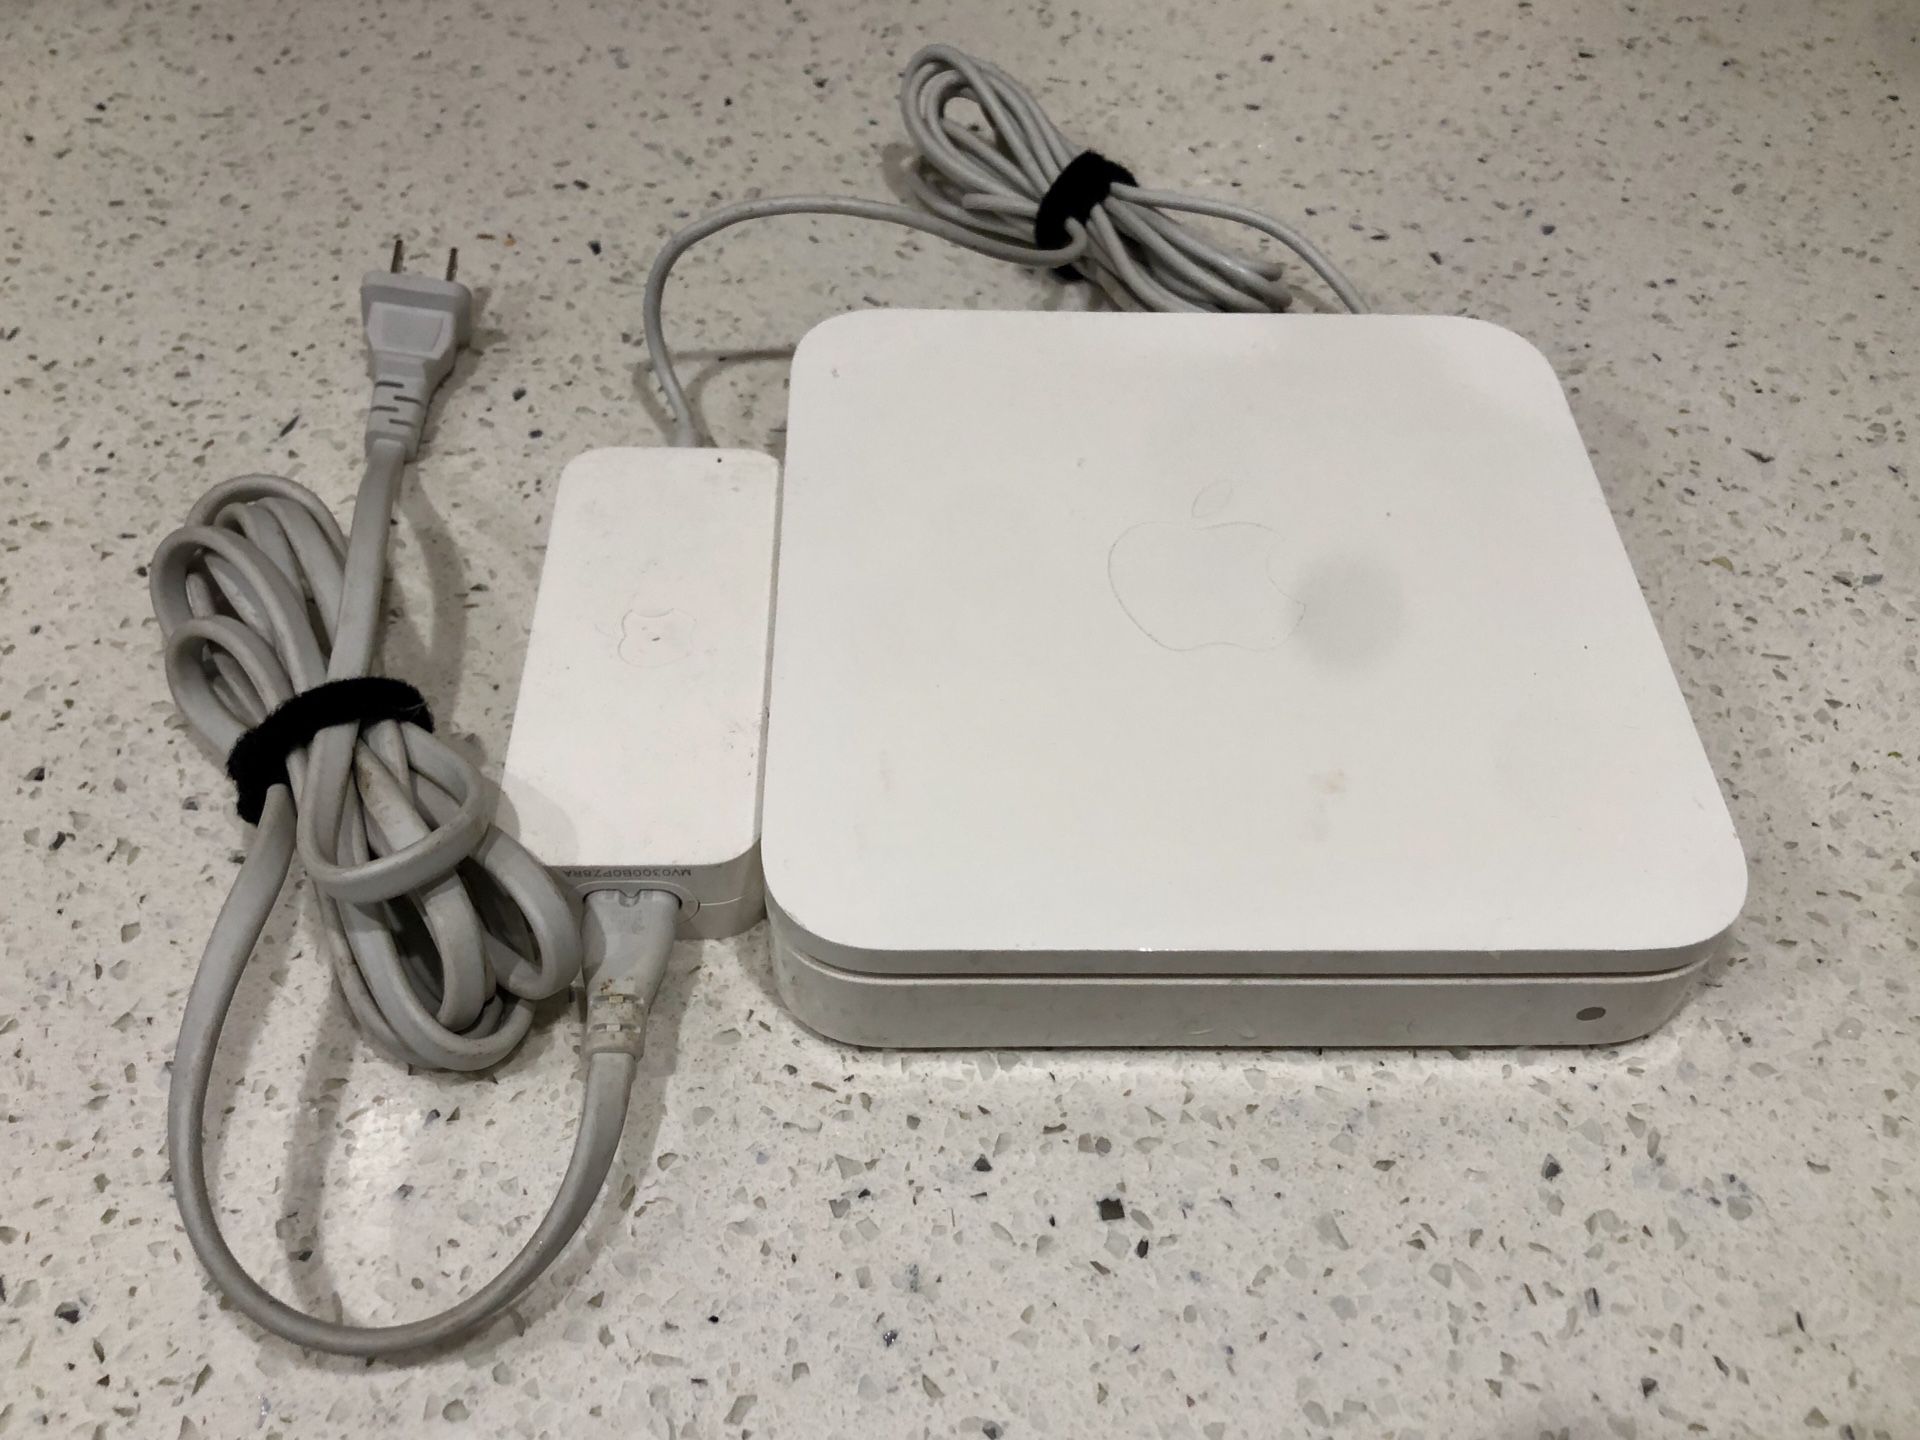 Apple A1354 AirPort Extreme Base Station WiFi Router